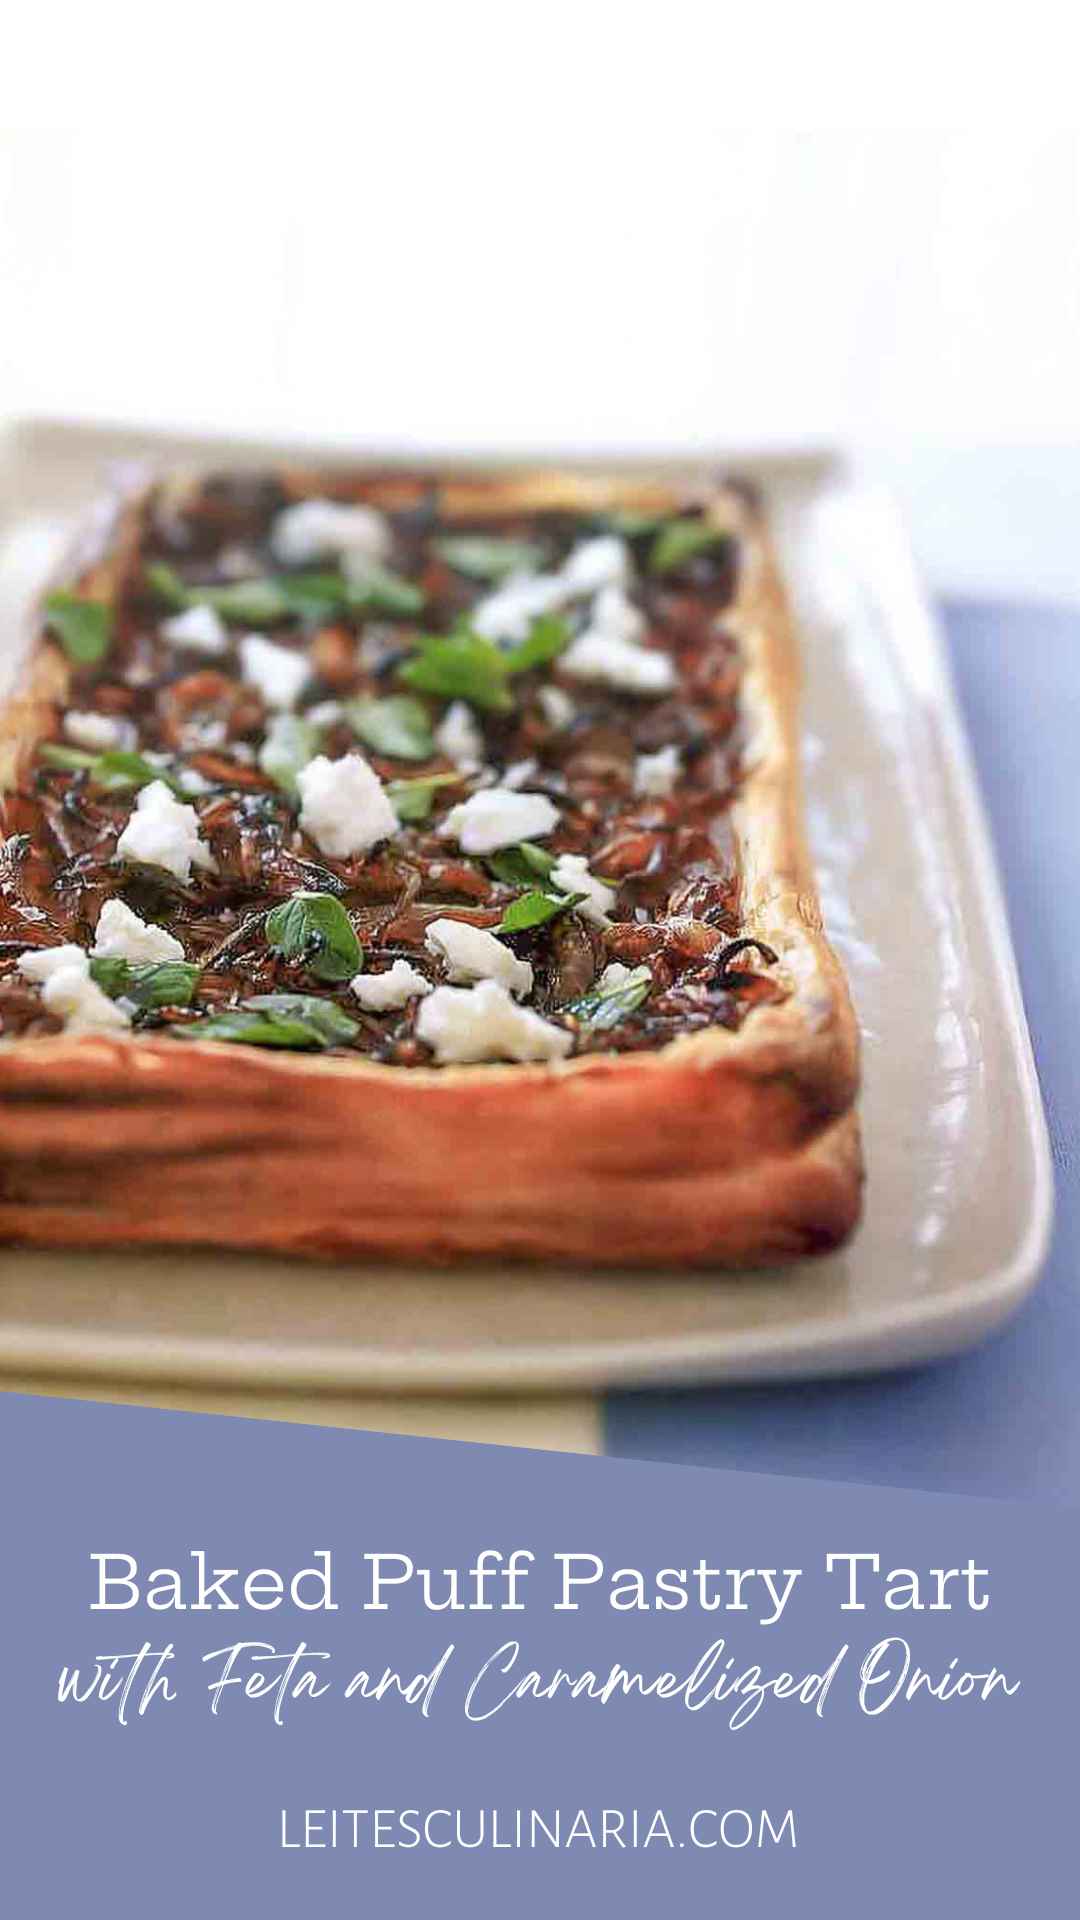 A whole puff pastry tart topped with caramelized onions, feta cheese, and oregano leaves on a rectangular platter.